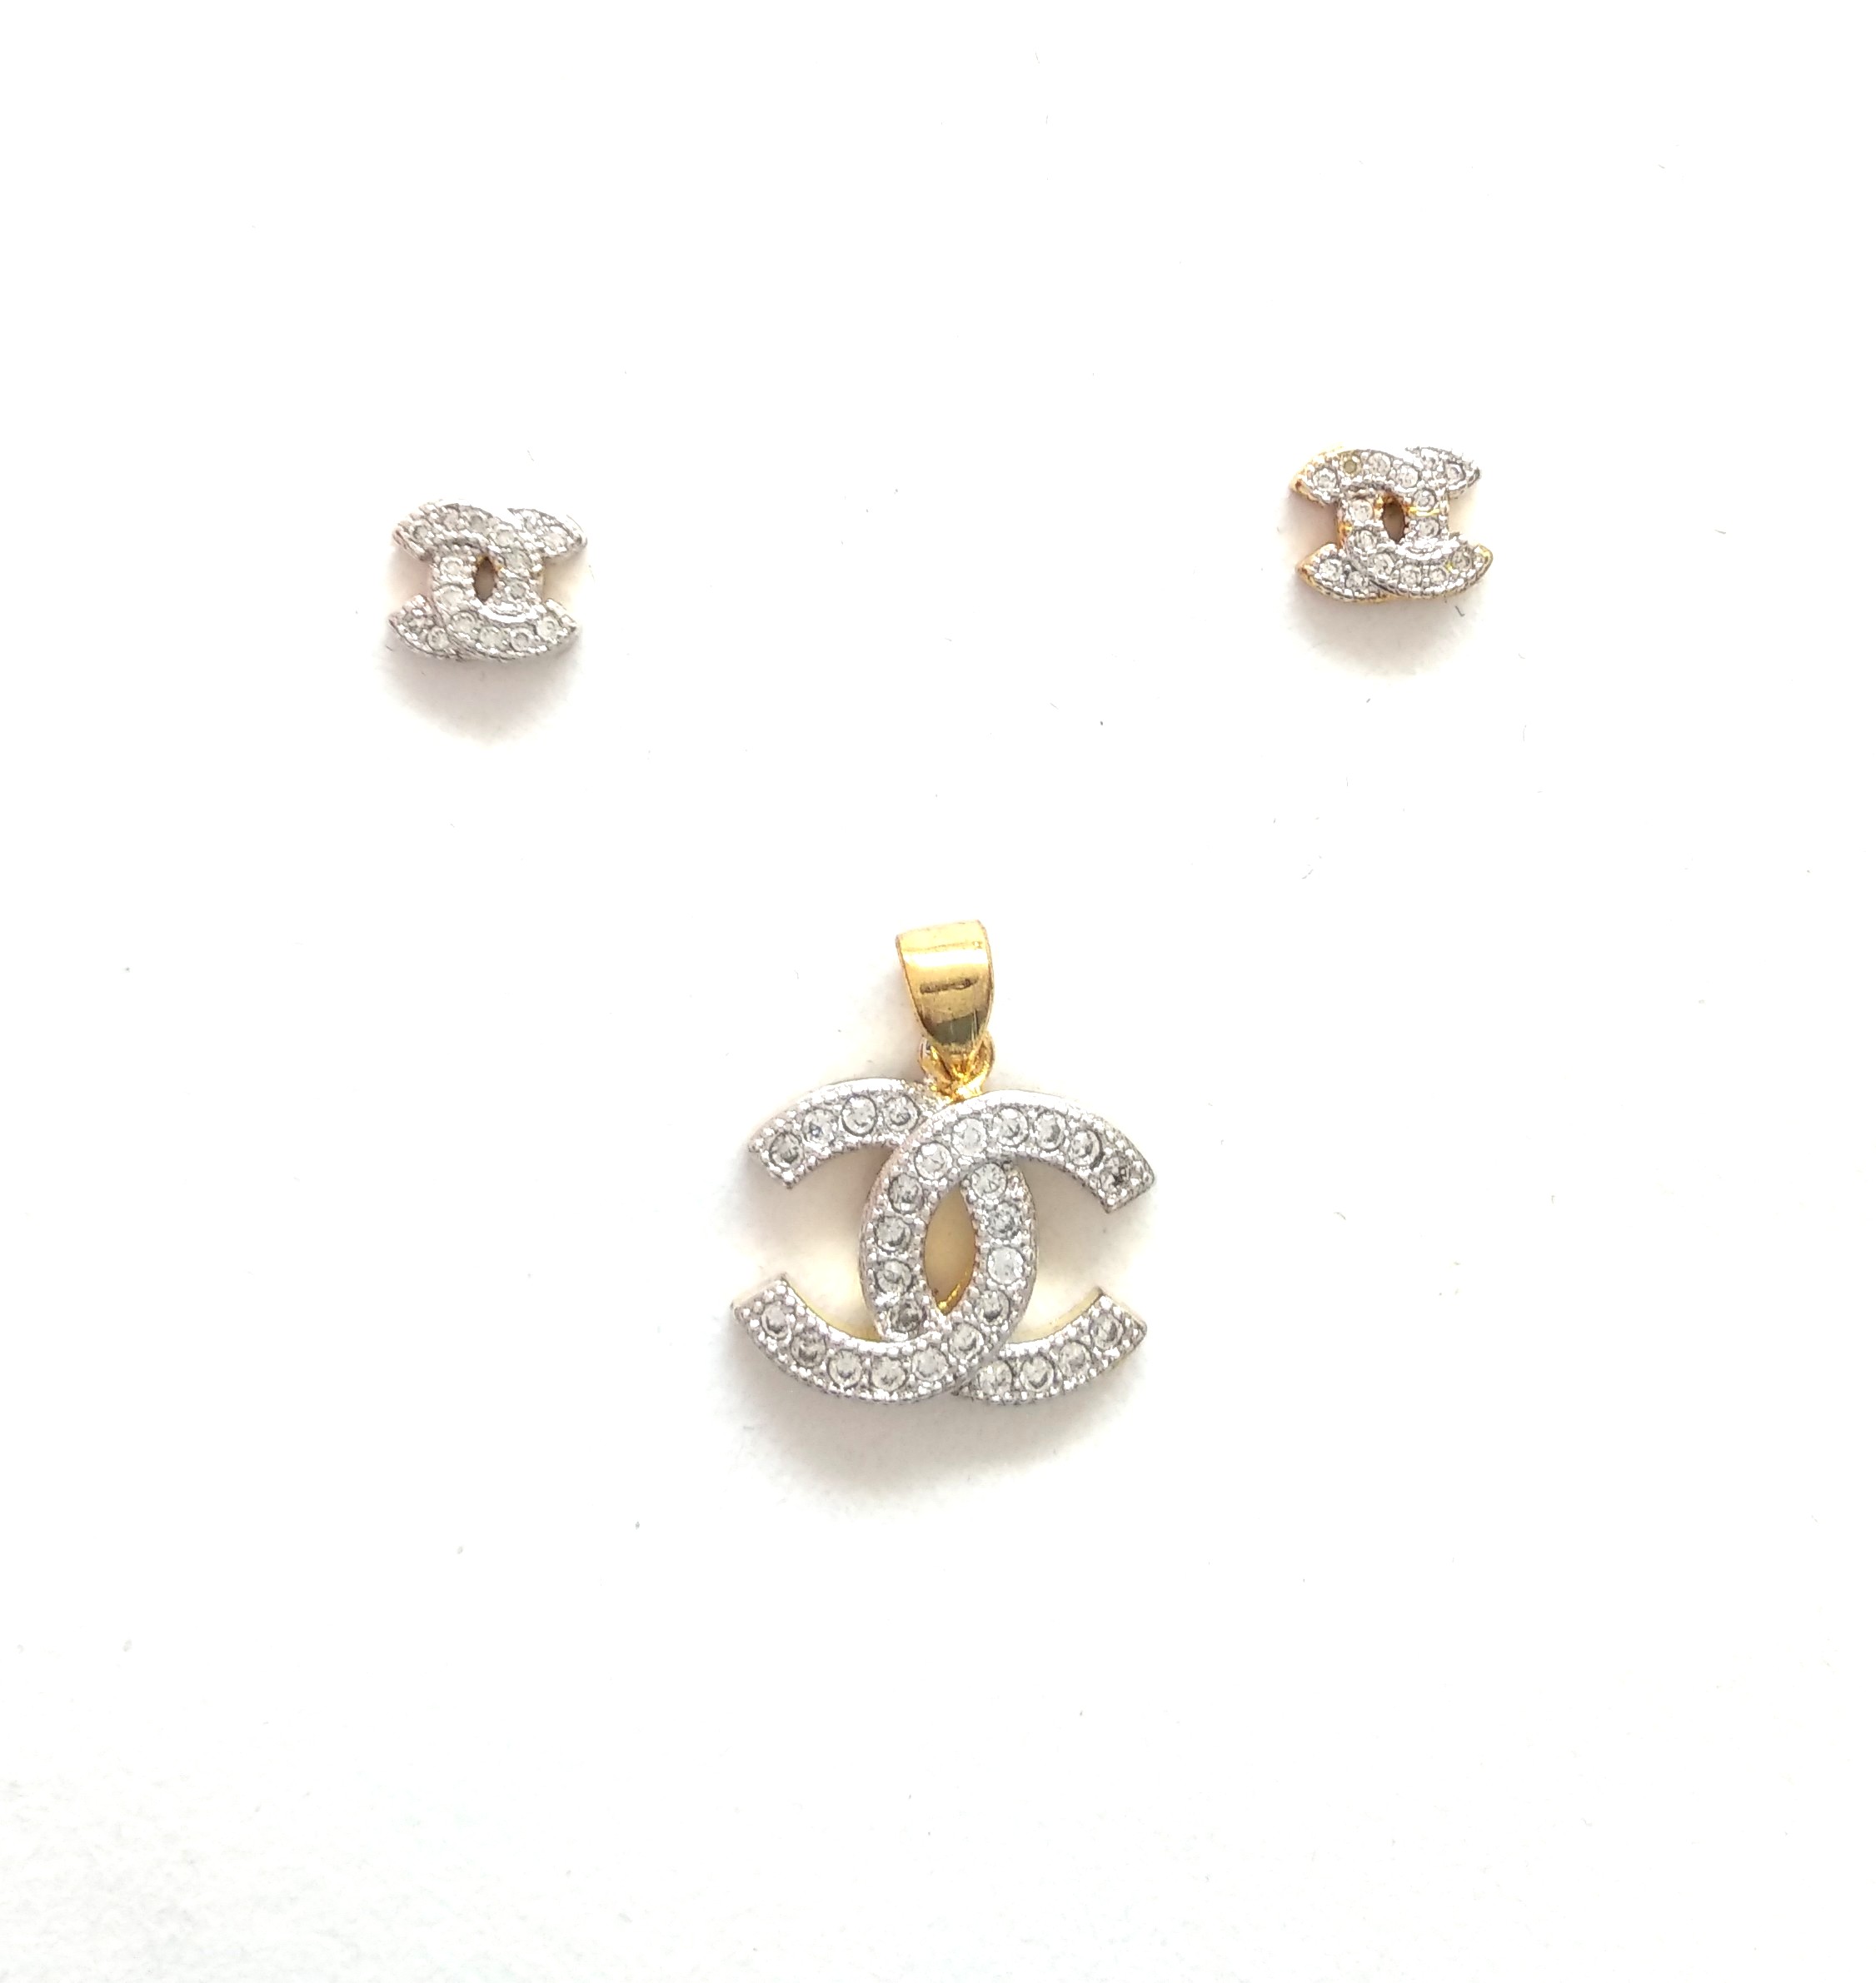 Matching Earring And Pendant Set Sale In 14K Yellow Gold | Fascinating  Diamonds